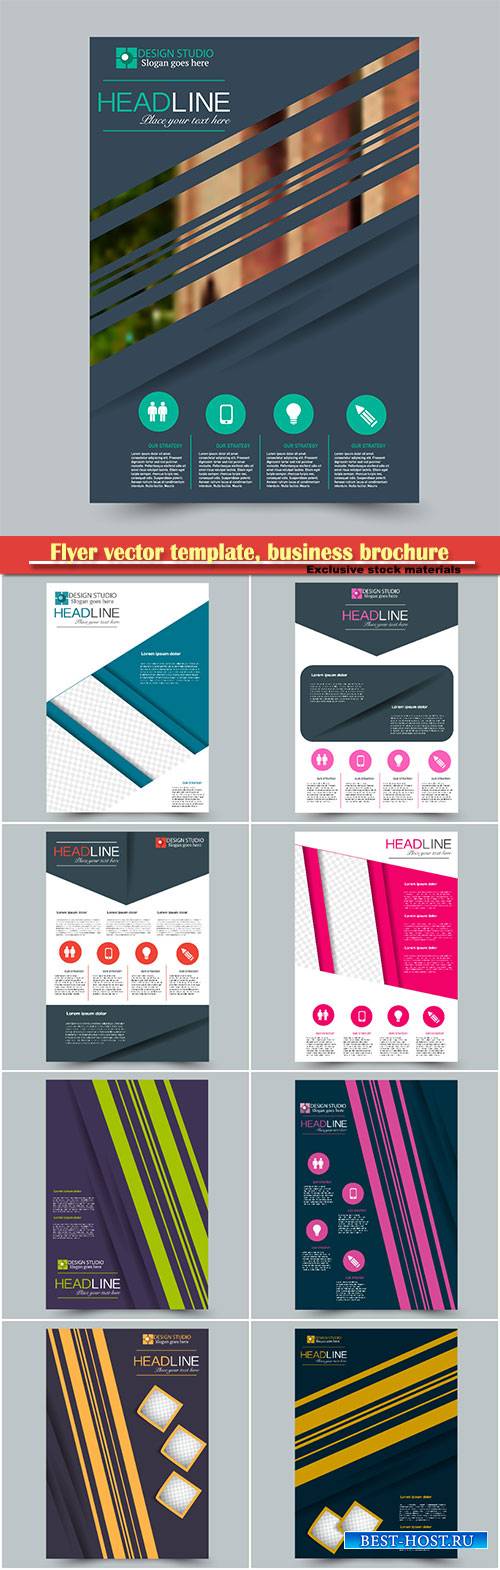 Flyer vector template, business brochure, magazine cover # 38